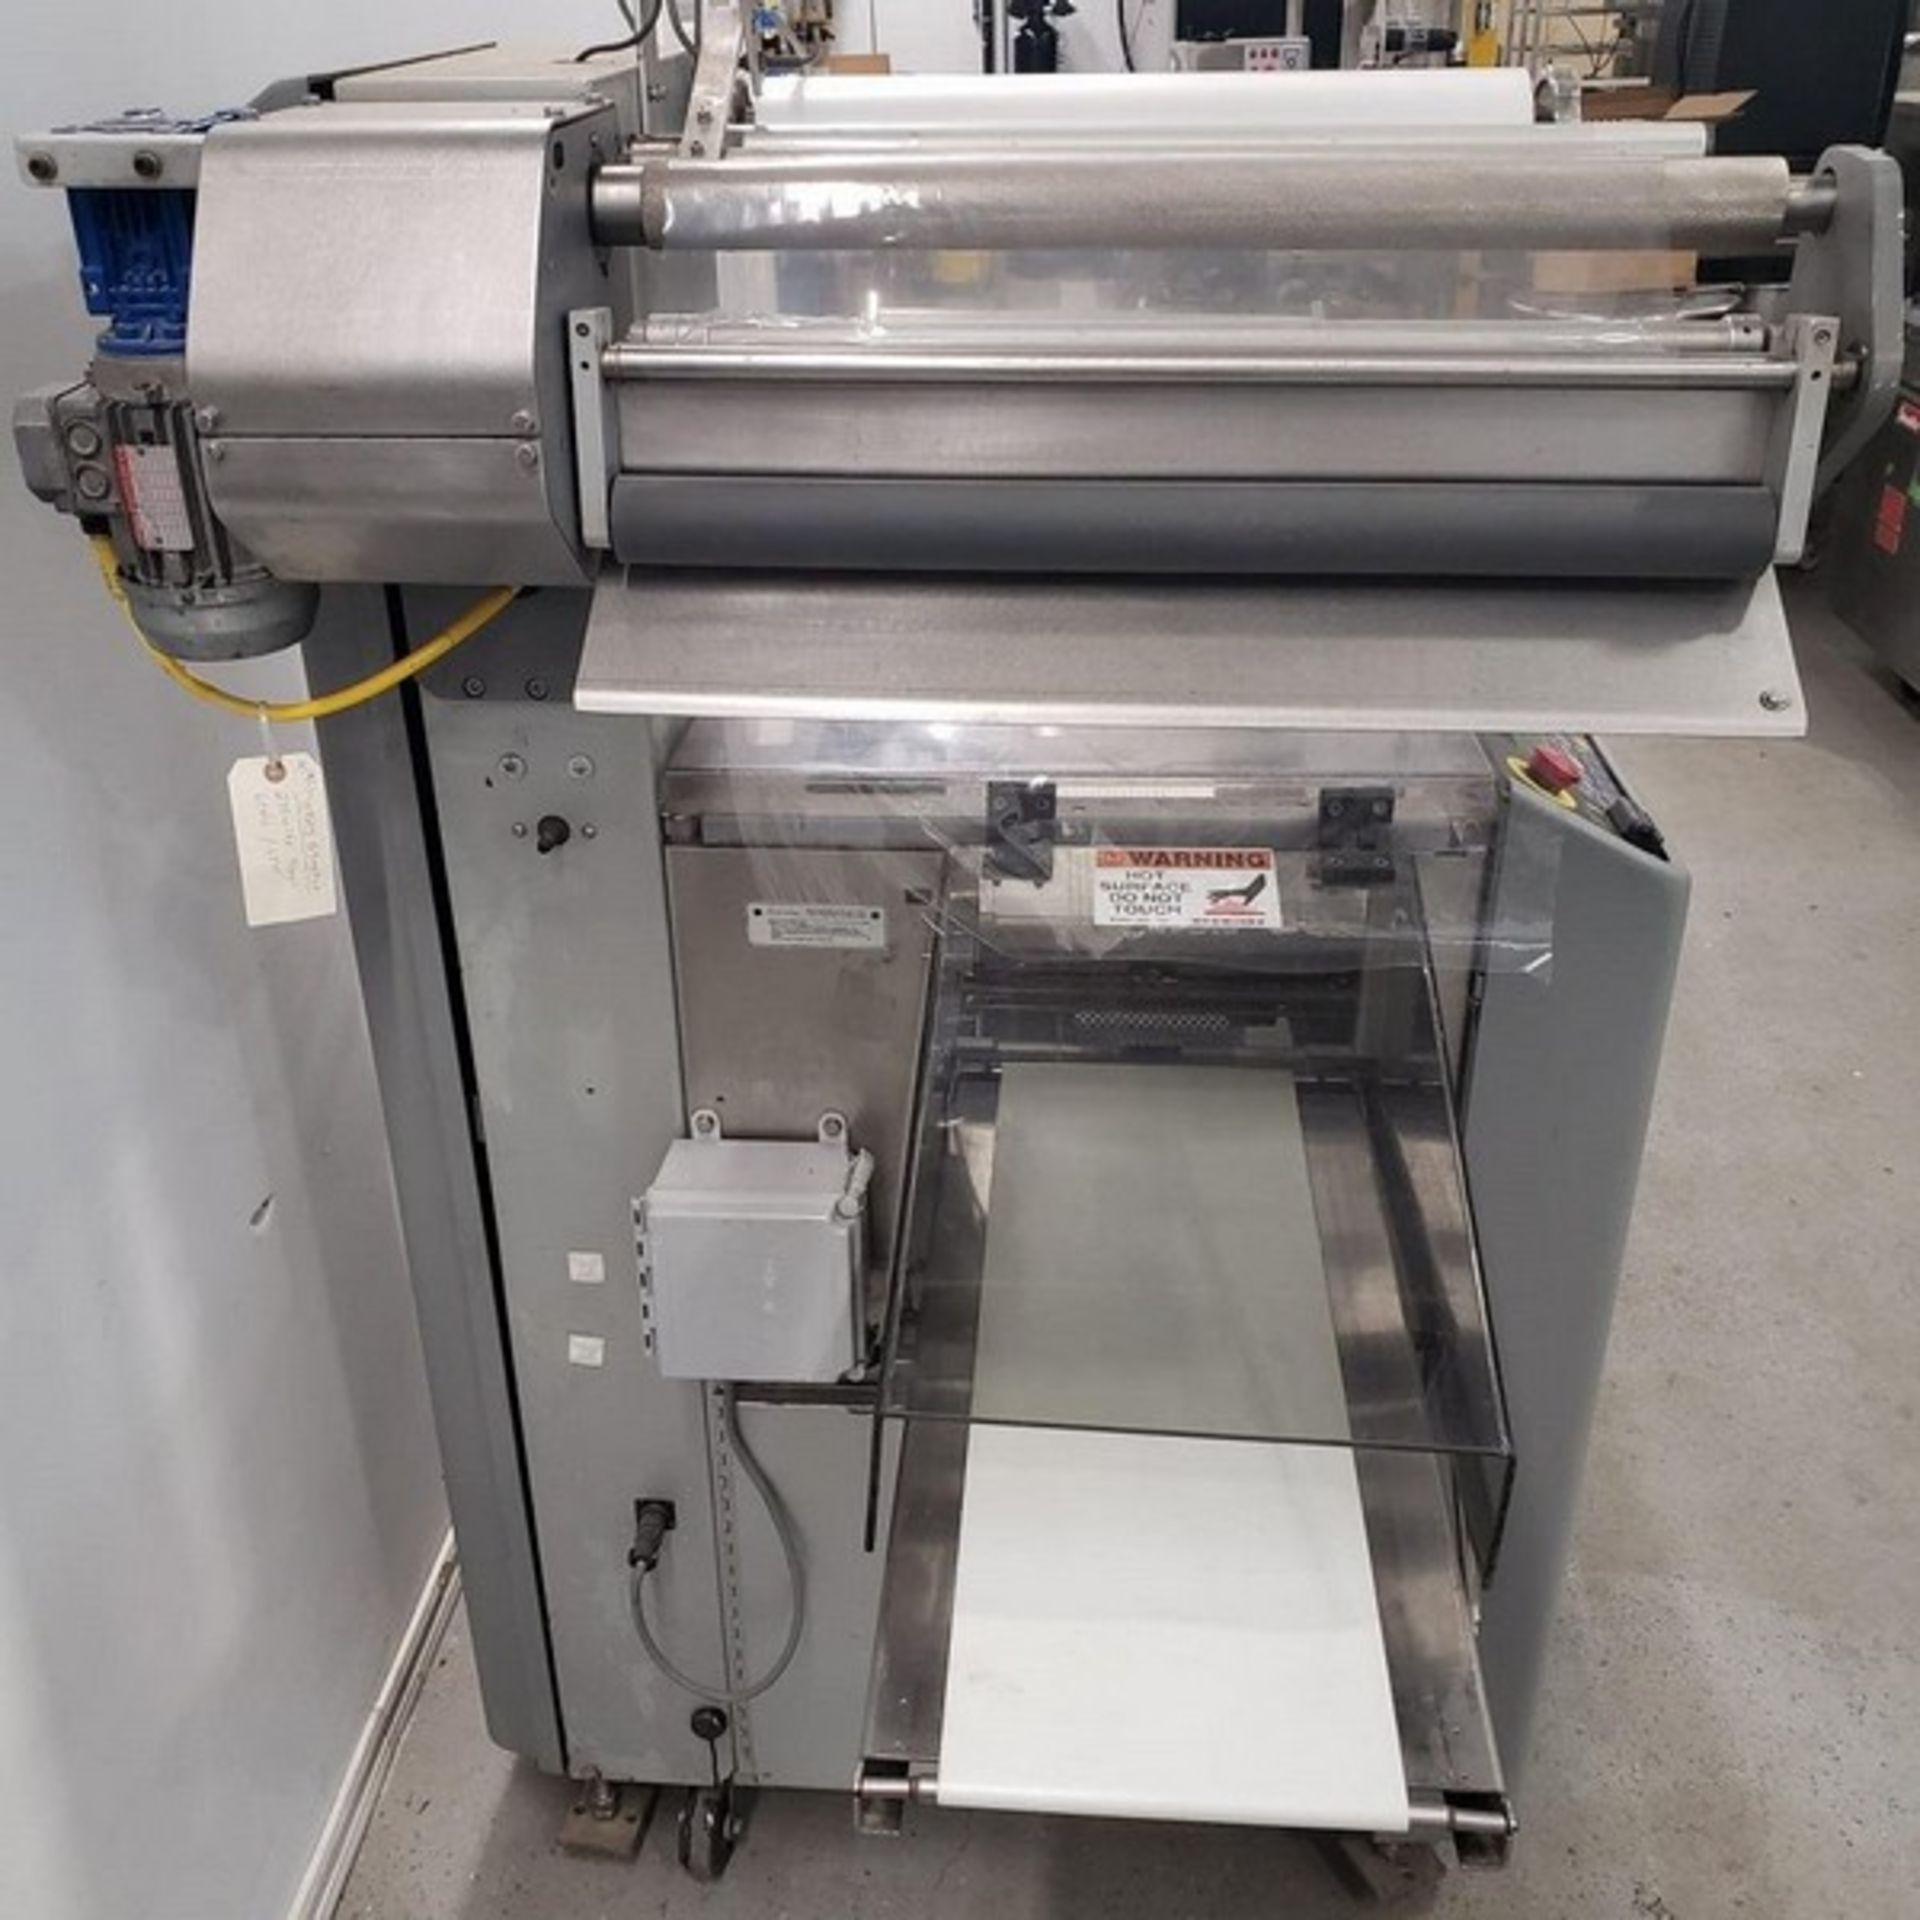 Doboy Model Stratus Horizontal Flow Wrapper, food and cosmetical grade, up to 50 packages per minute - Image 5 of 7